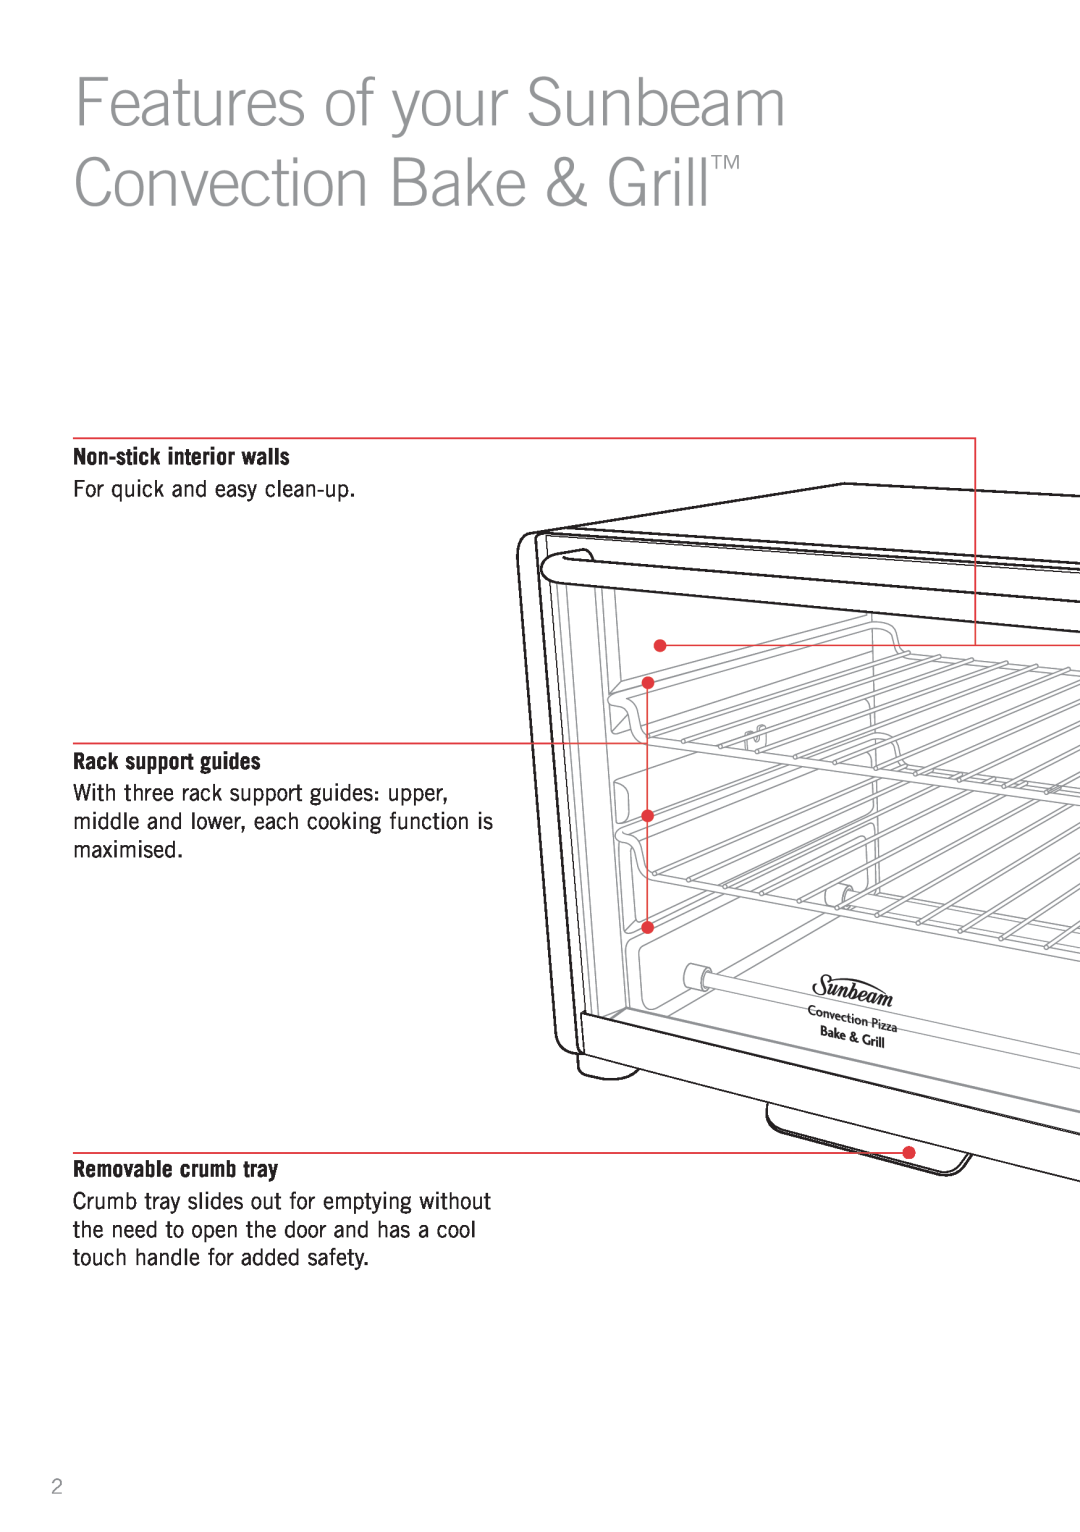 Sunbeam BT7000 manual Features of your Sunbeam Convection Bake & Grill, Non-stick interior walls, Rack support guides 